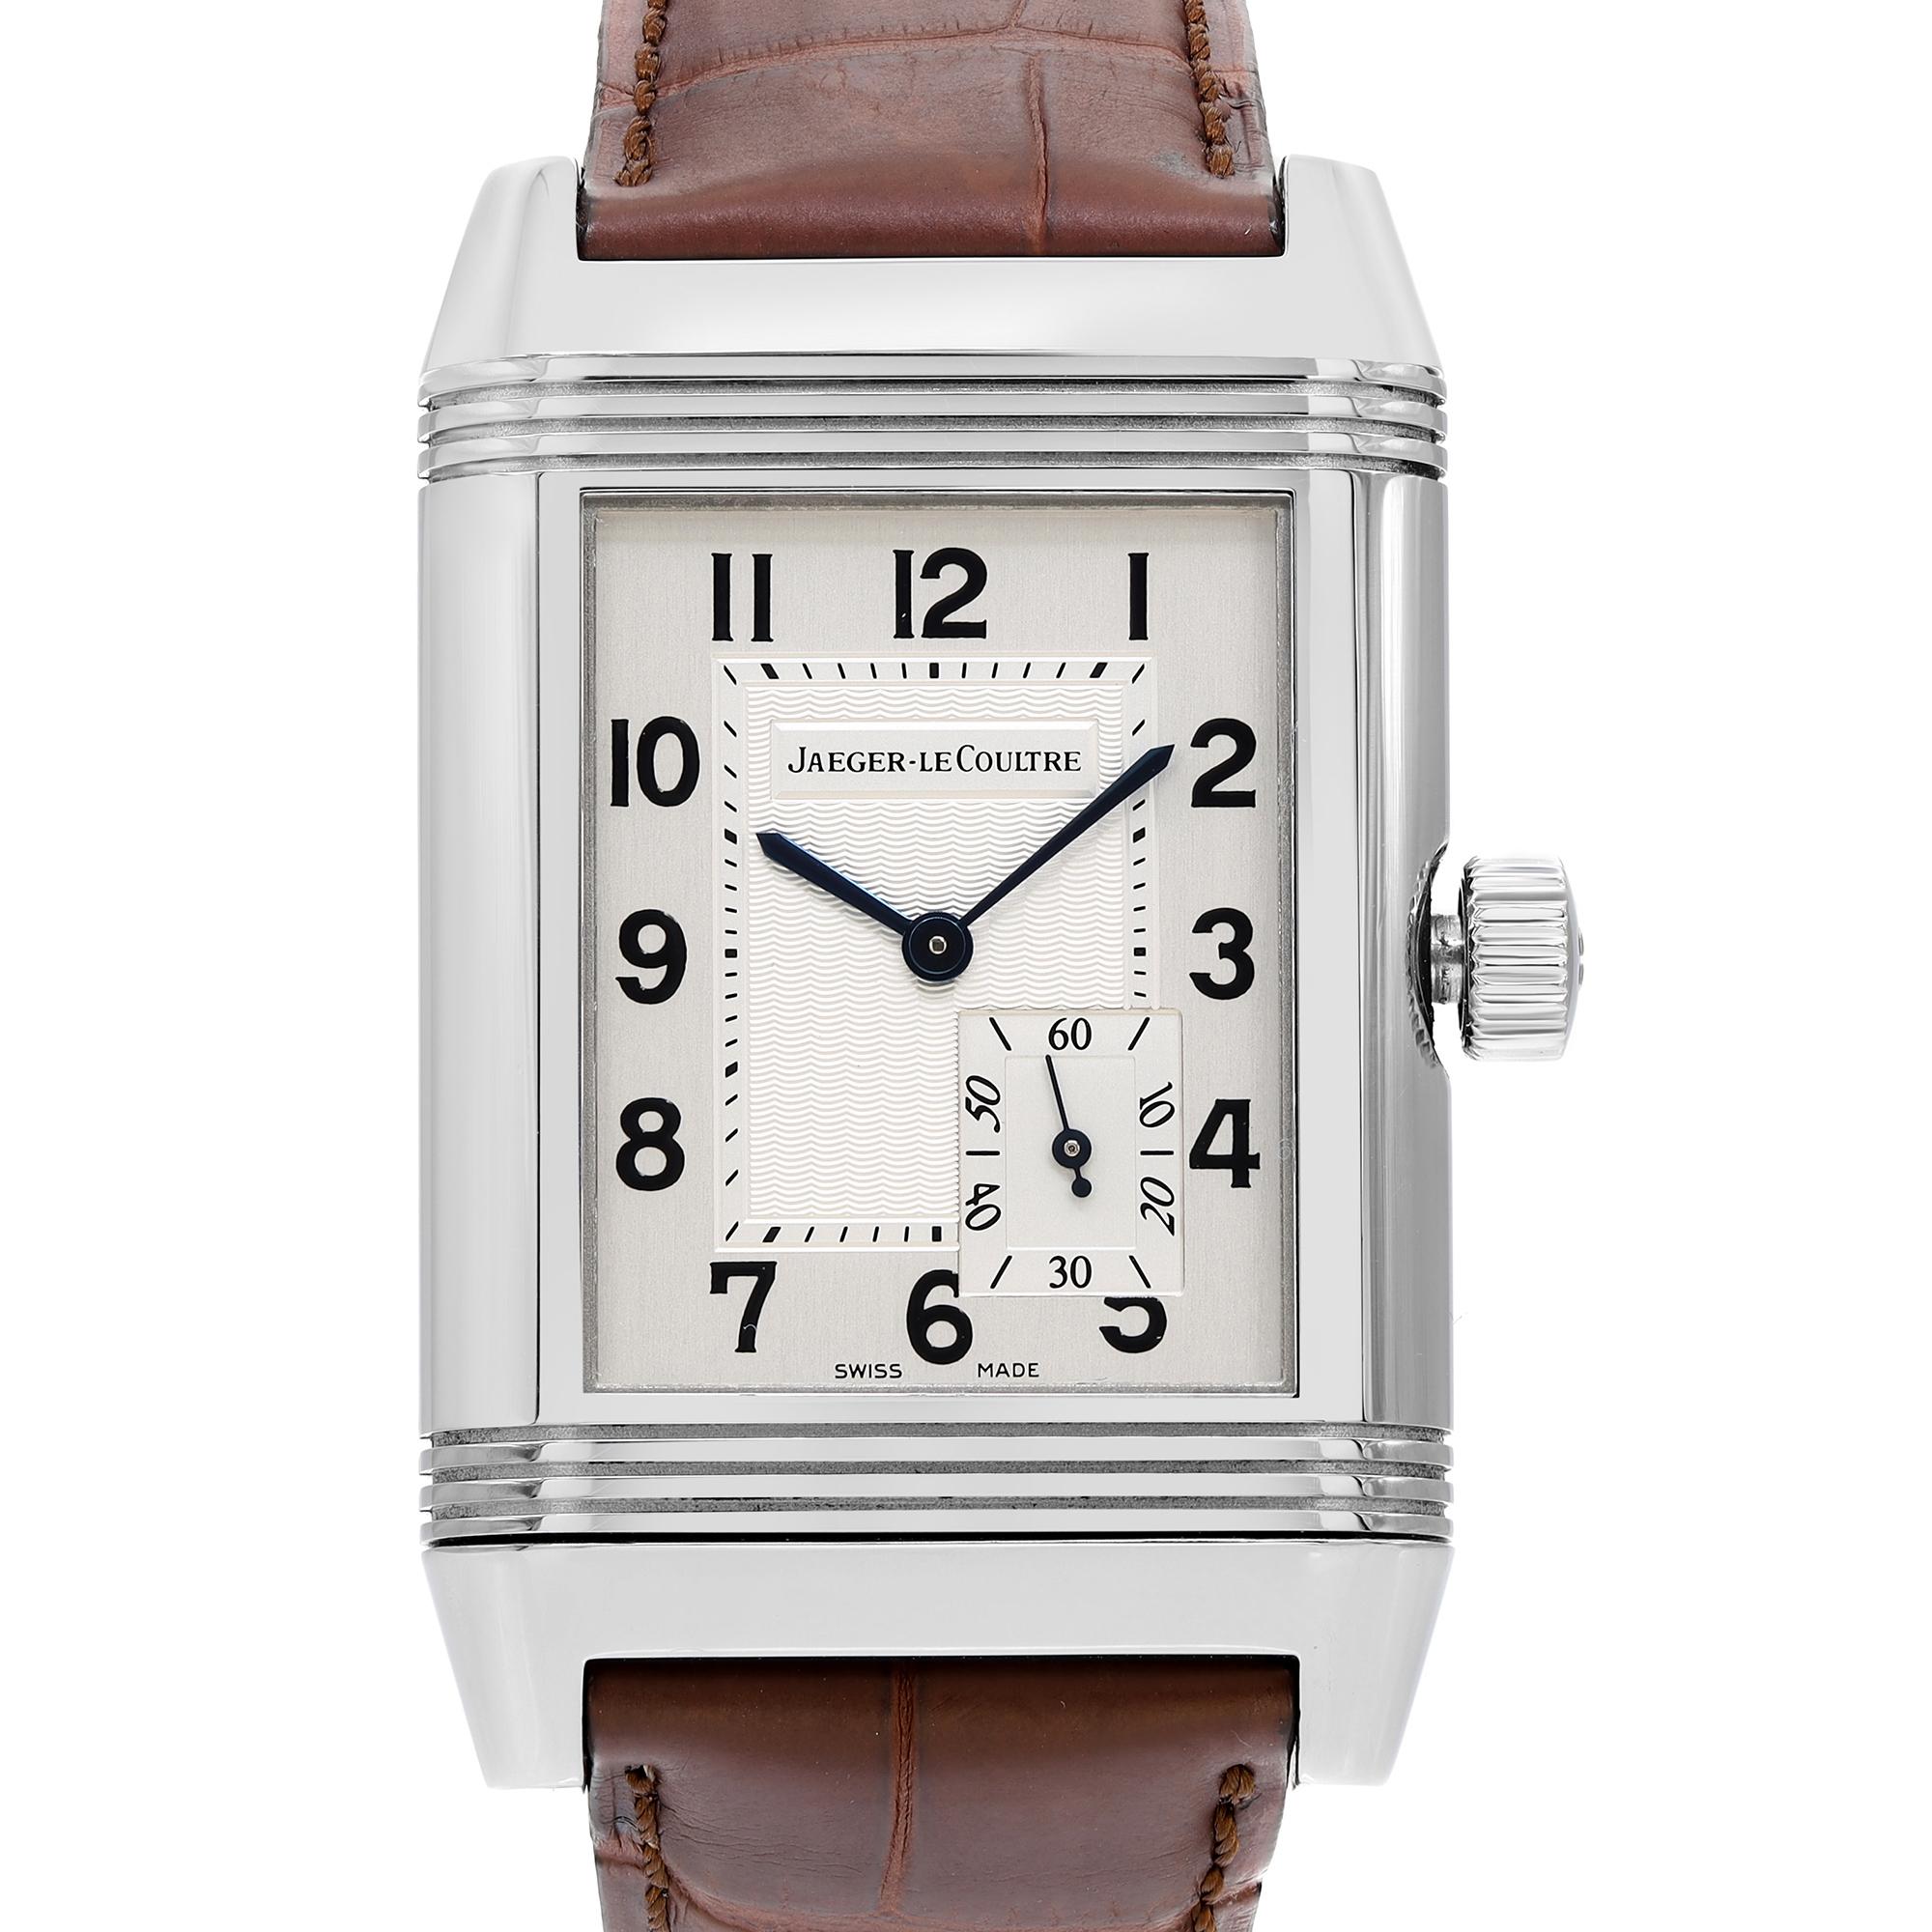 Pre-owned Jaeger-LeCoultre Grande Reverso Men's Watch Q3018420. Original Box and Papers are Included. Certificate dated 2004. Case Measurement 29X46.5mm. This Timepiece is Powered by a Mechanical (Hand-Winding) Movement and Features: Stainless Steel